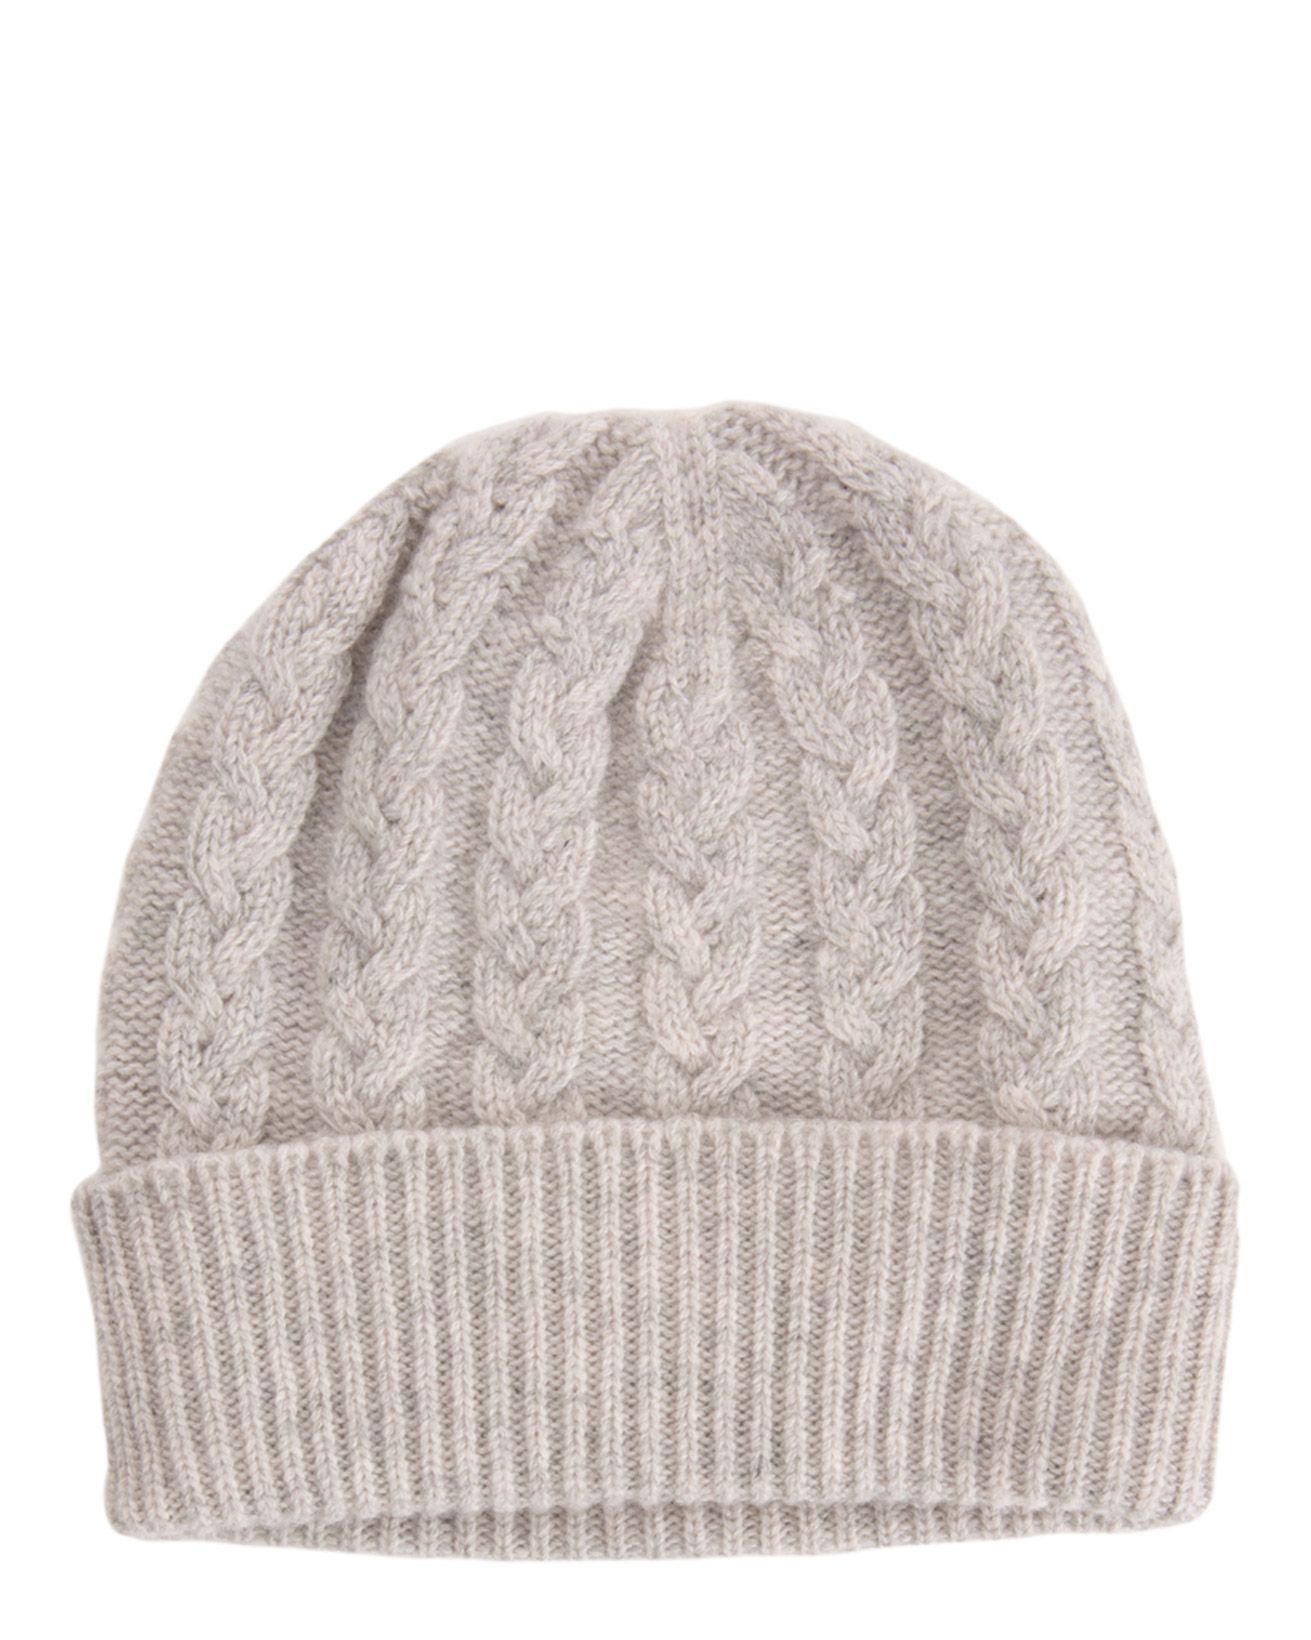 7528-statement cable hat-dove grey.jpg